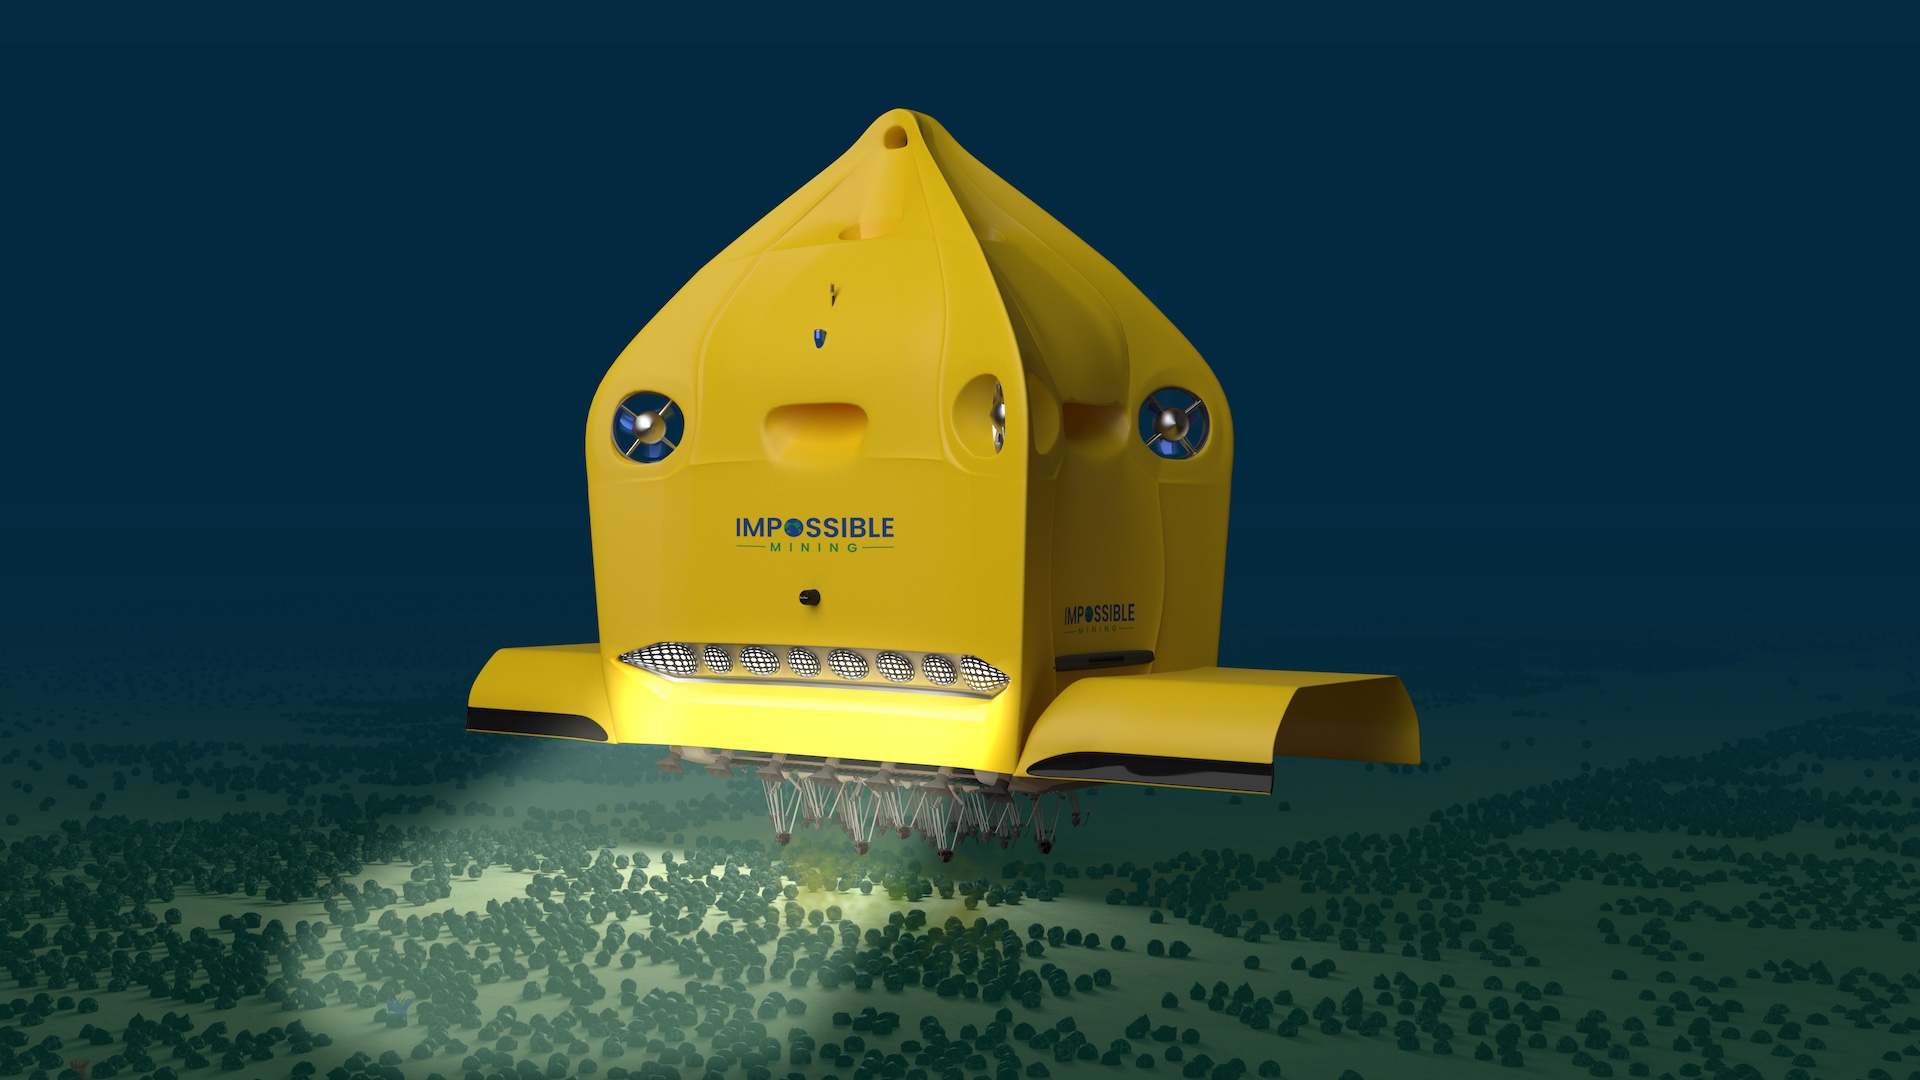 Impossible Mining AUV